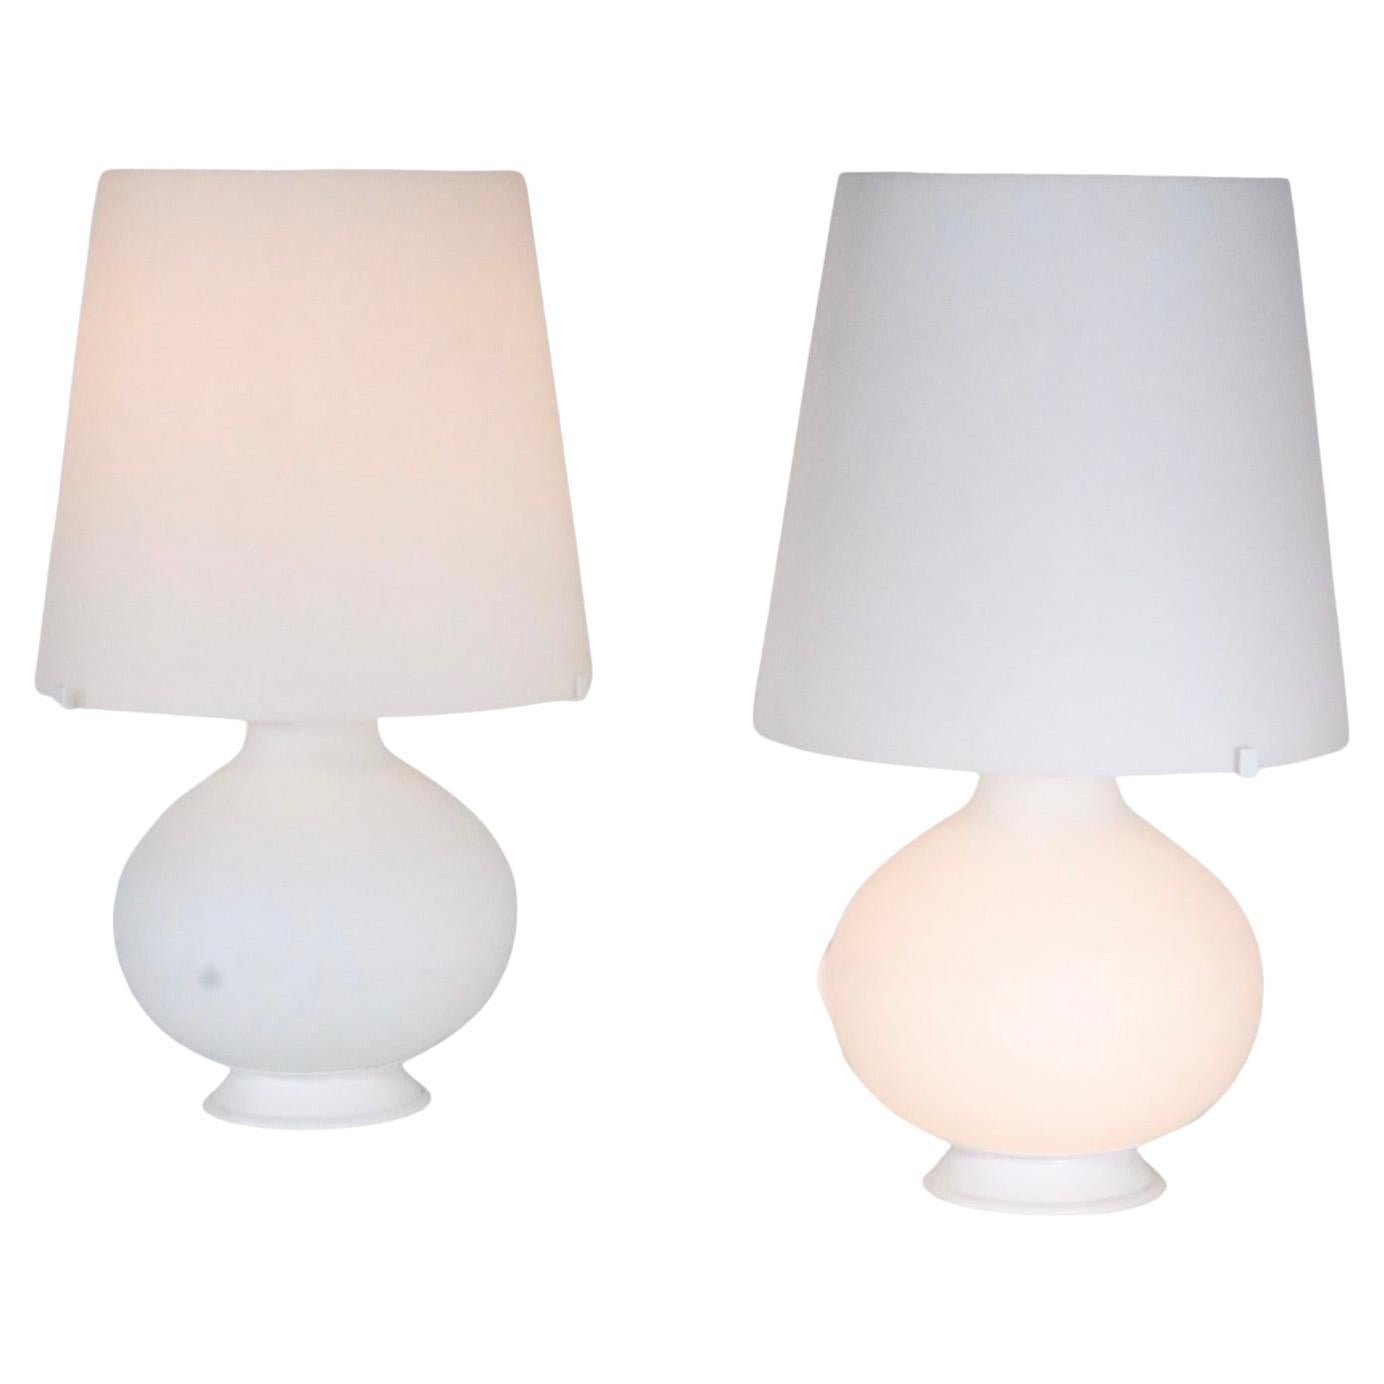 Exquisite pair of Max Ingrand design for Fontana Arte frosted glass table lamps, model 1853. Originally designed in the Mid 20th C, these are later reissues, made by Fontana Arte circa 1990/ 2010. The lamps feature frosted white glass bodies and